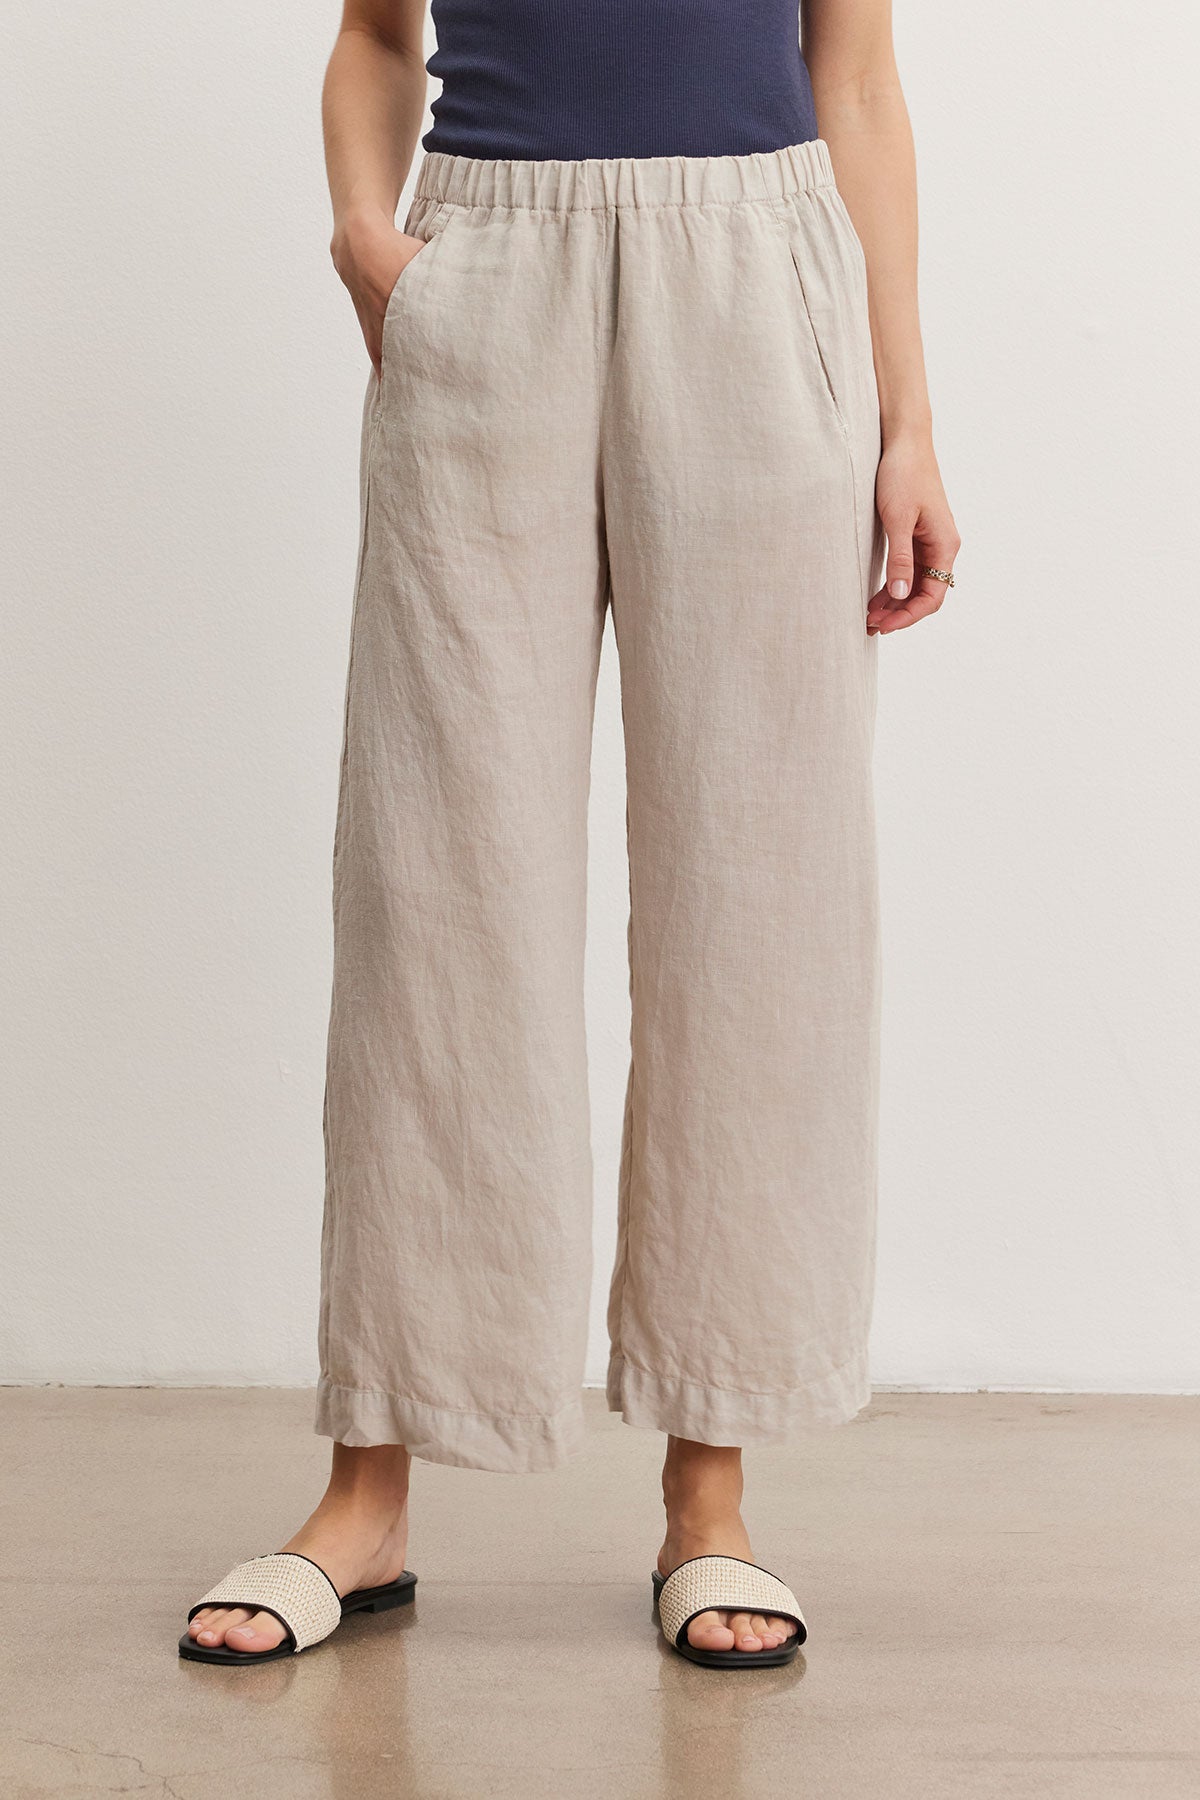   A person wearing light beige LOLA LINEN PANT by Velvet by Graham & Spencer, relaxed leg pants with hands in pockets, a dark blue top, and light-colored slip-on sandals. 